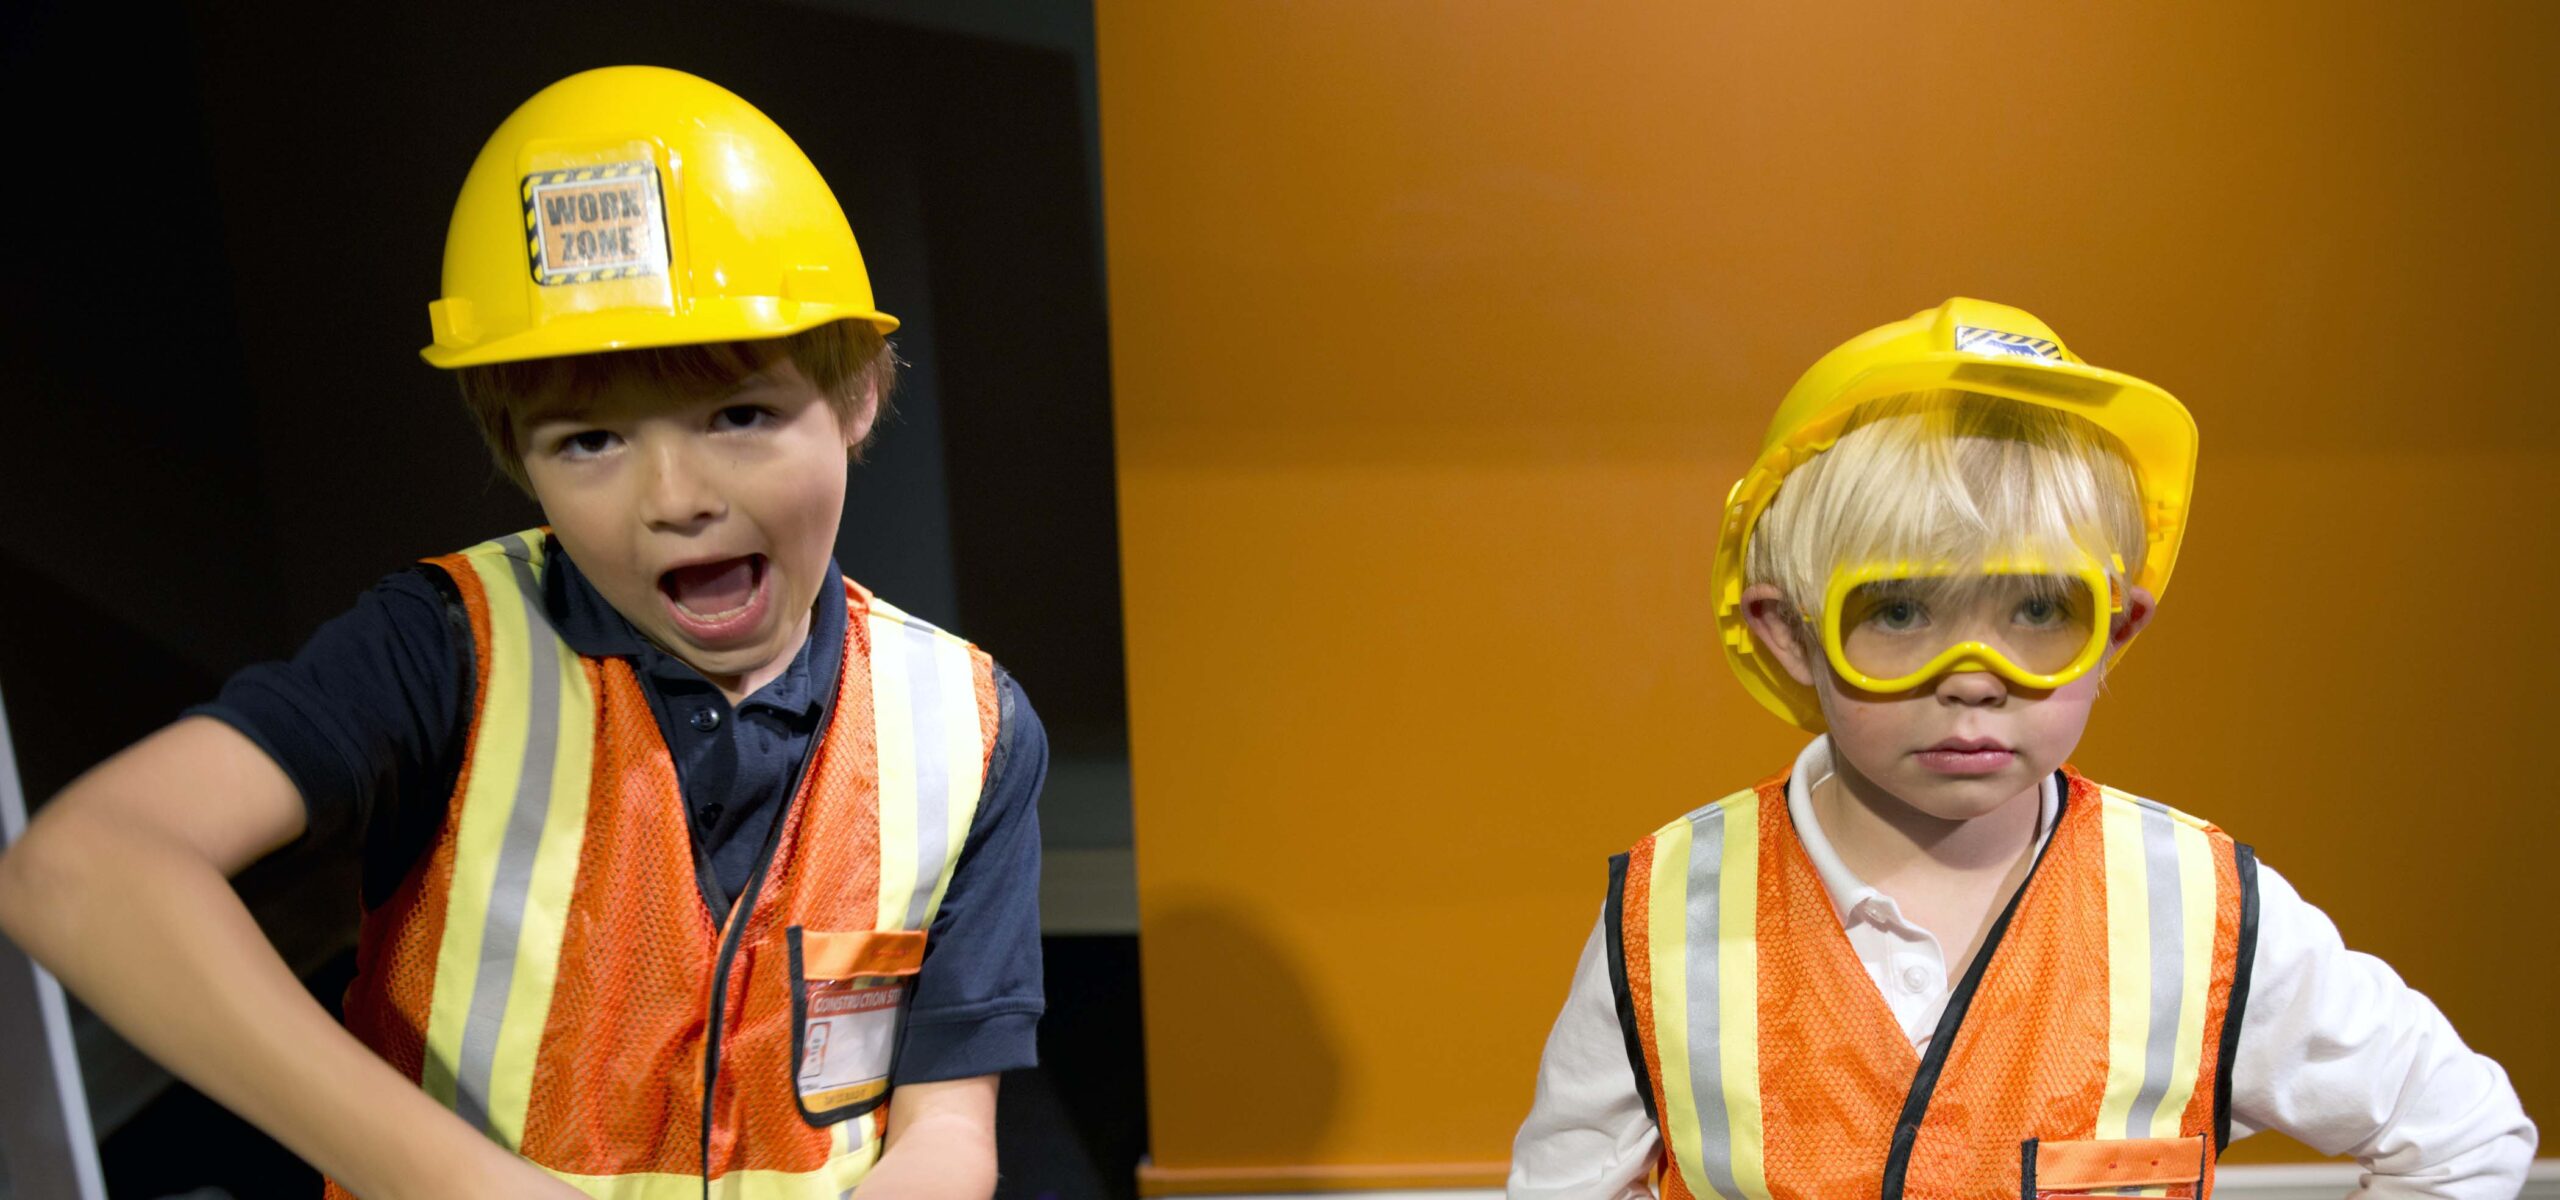 Young boys dressed up in toy construction gear like hardhats and vests.